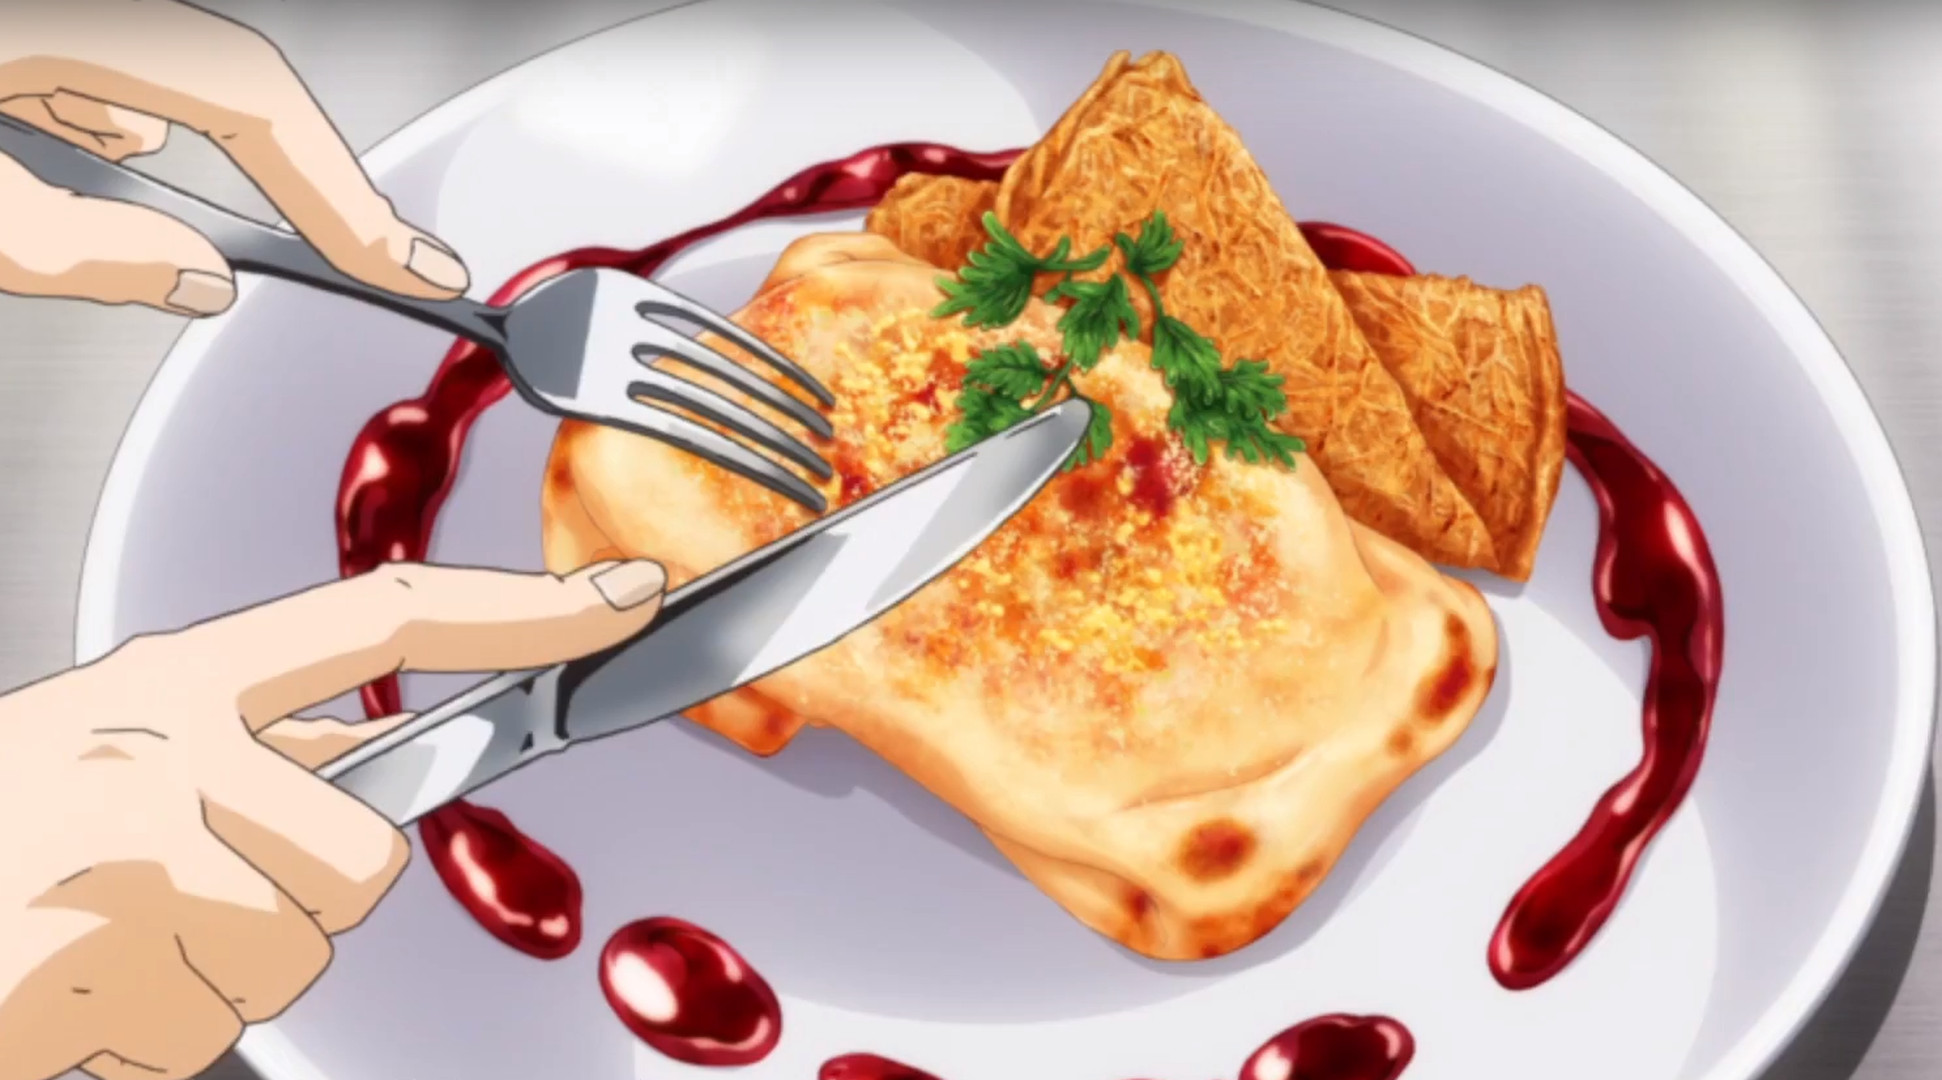 Food Wars! animators reveal how the anime makes food look so delicious - Po...